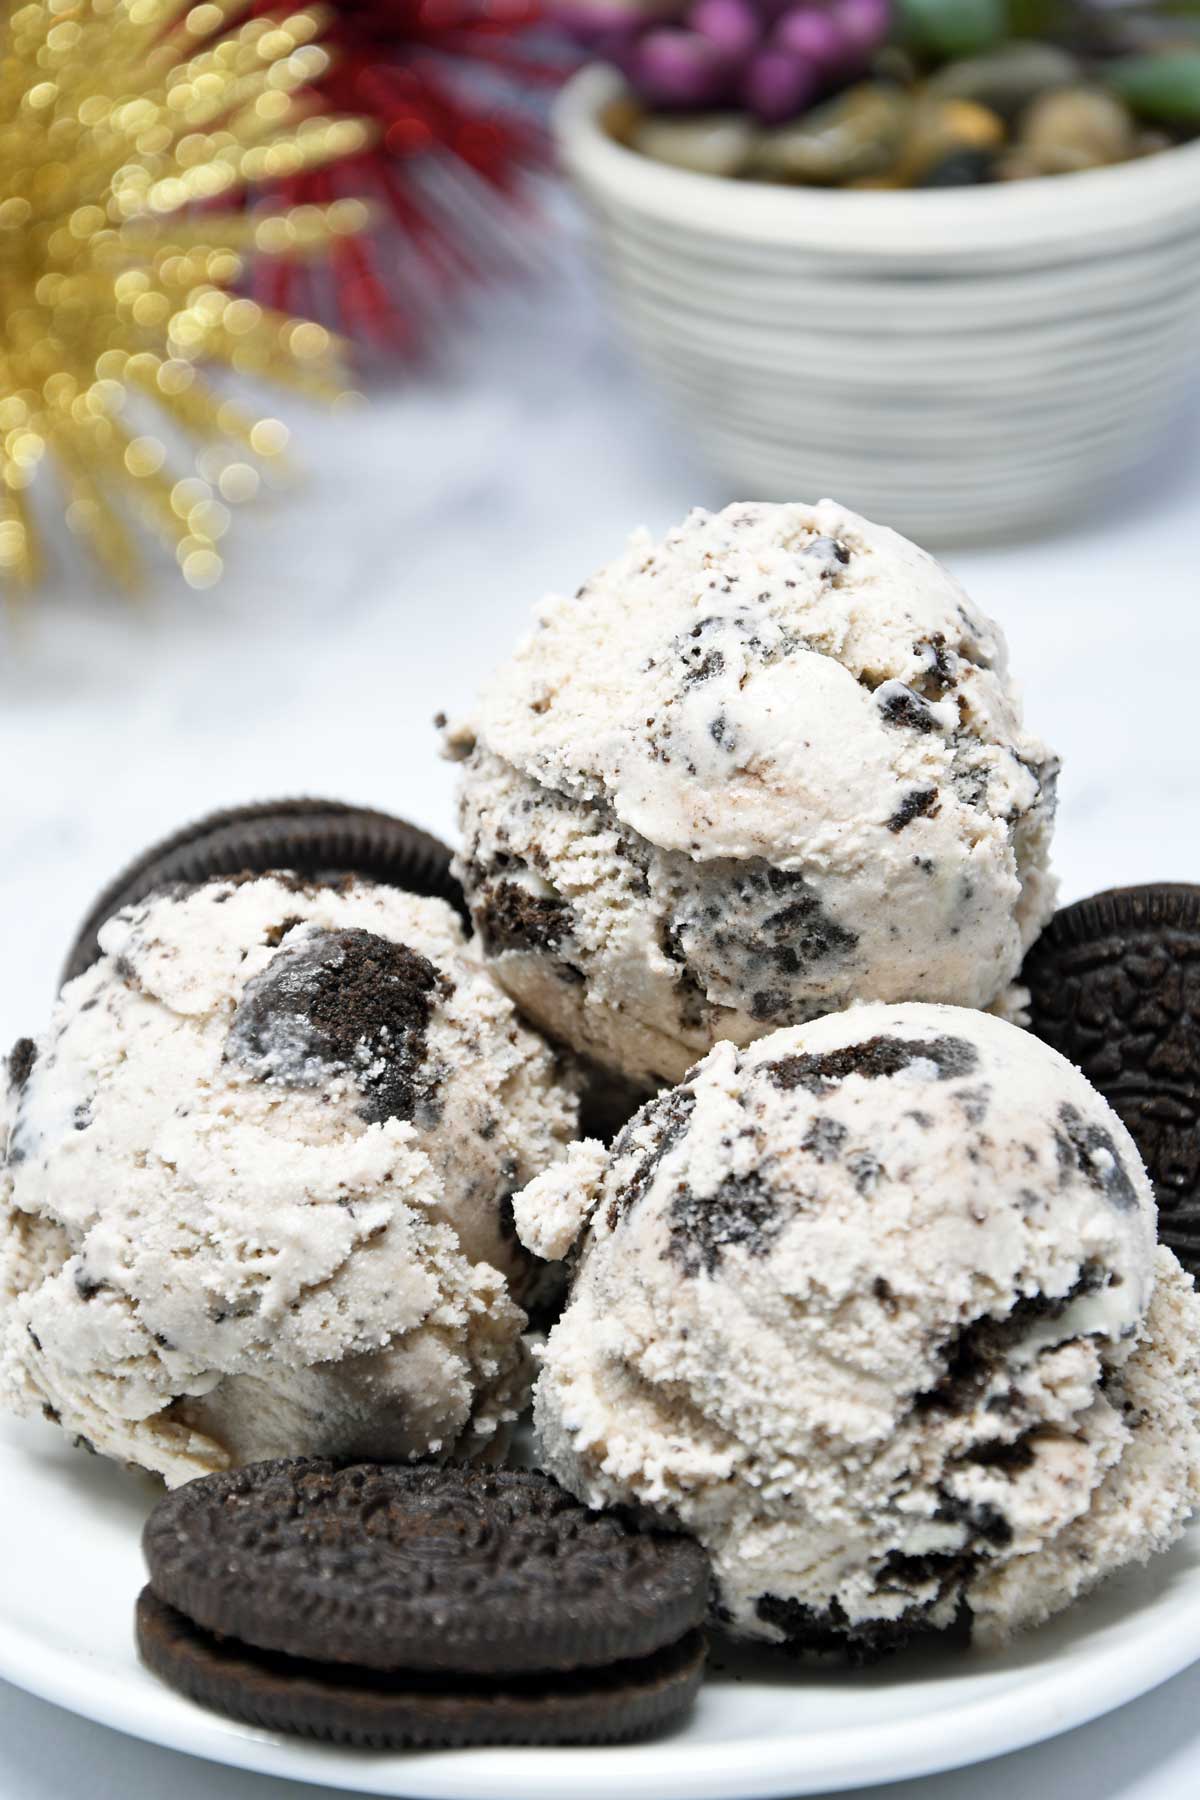 Cookies and cream ice cream scoops in a plate.